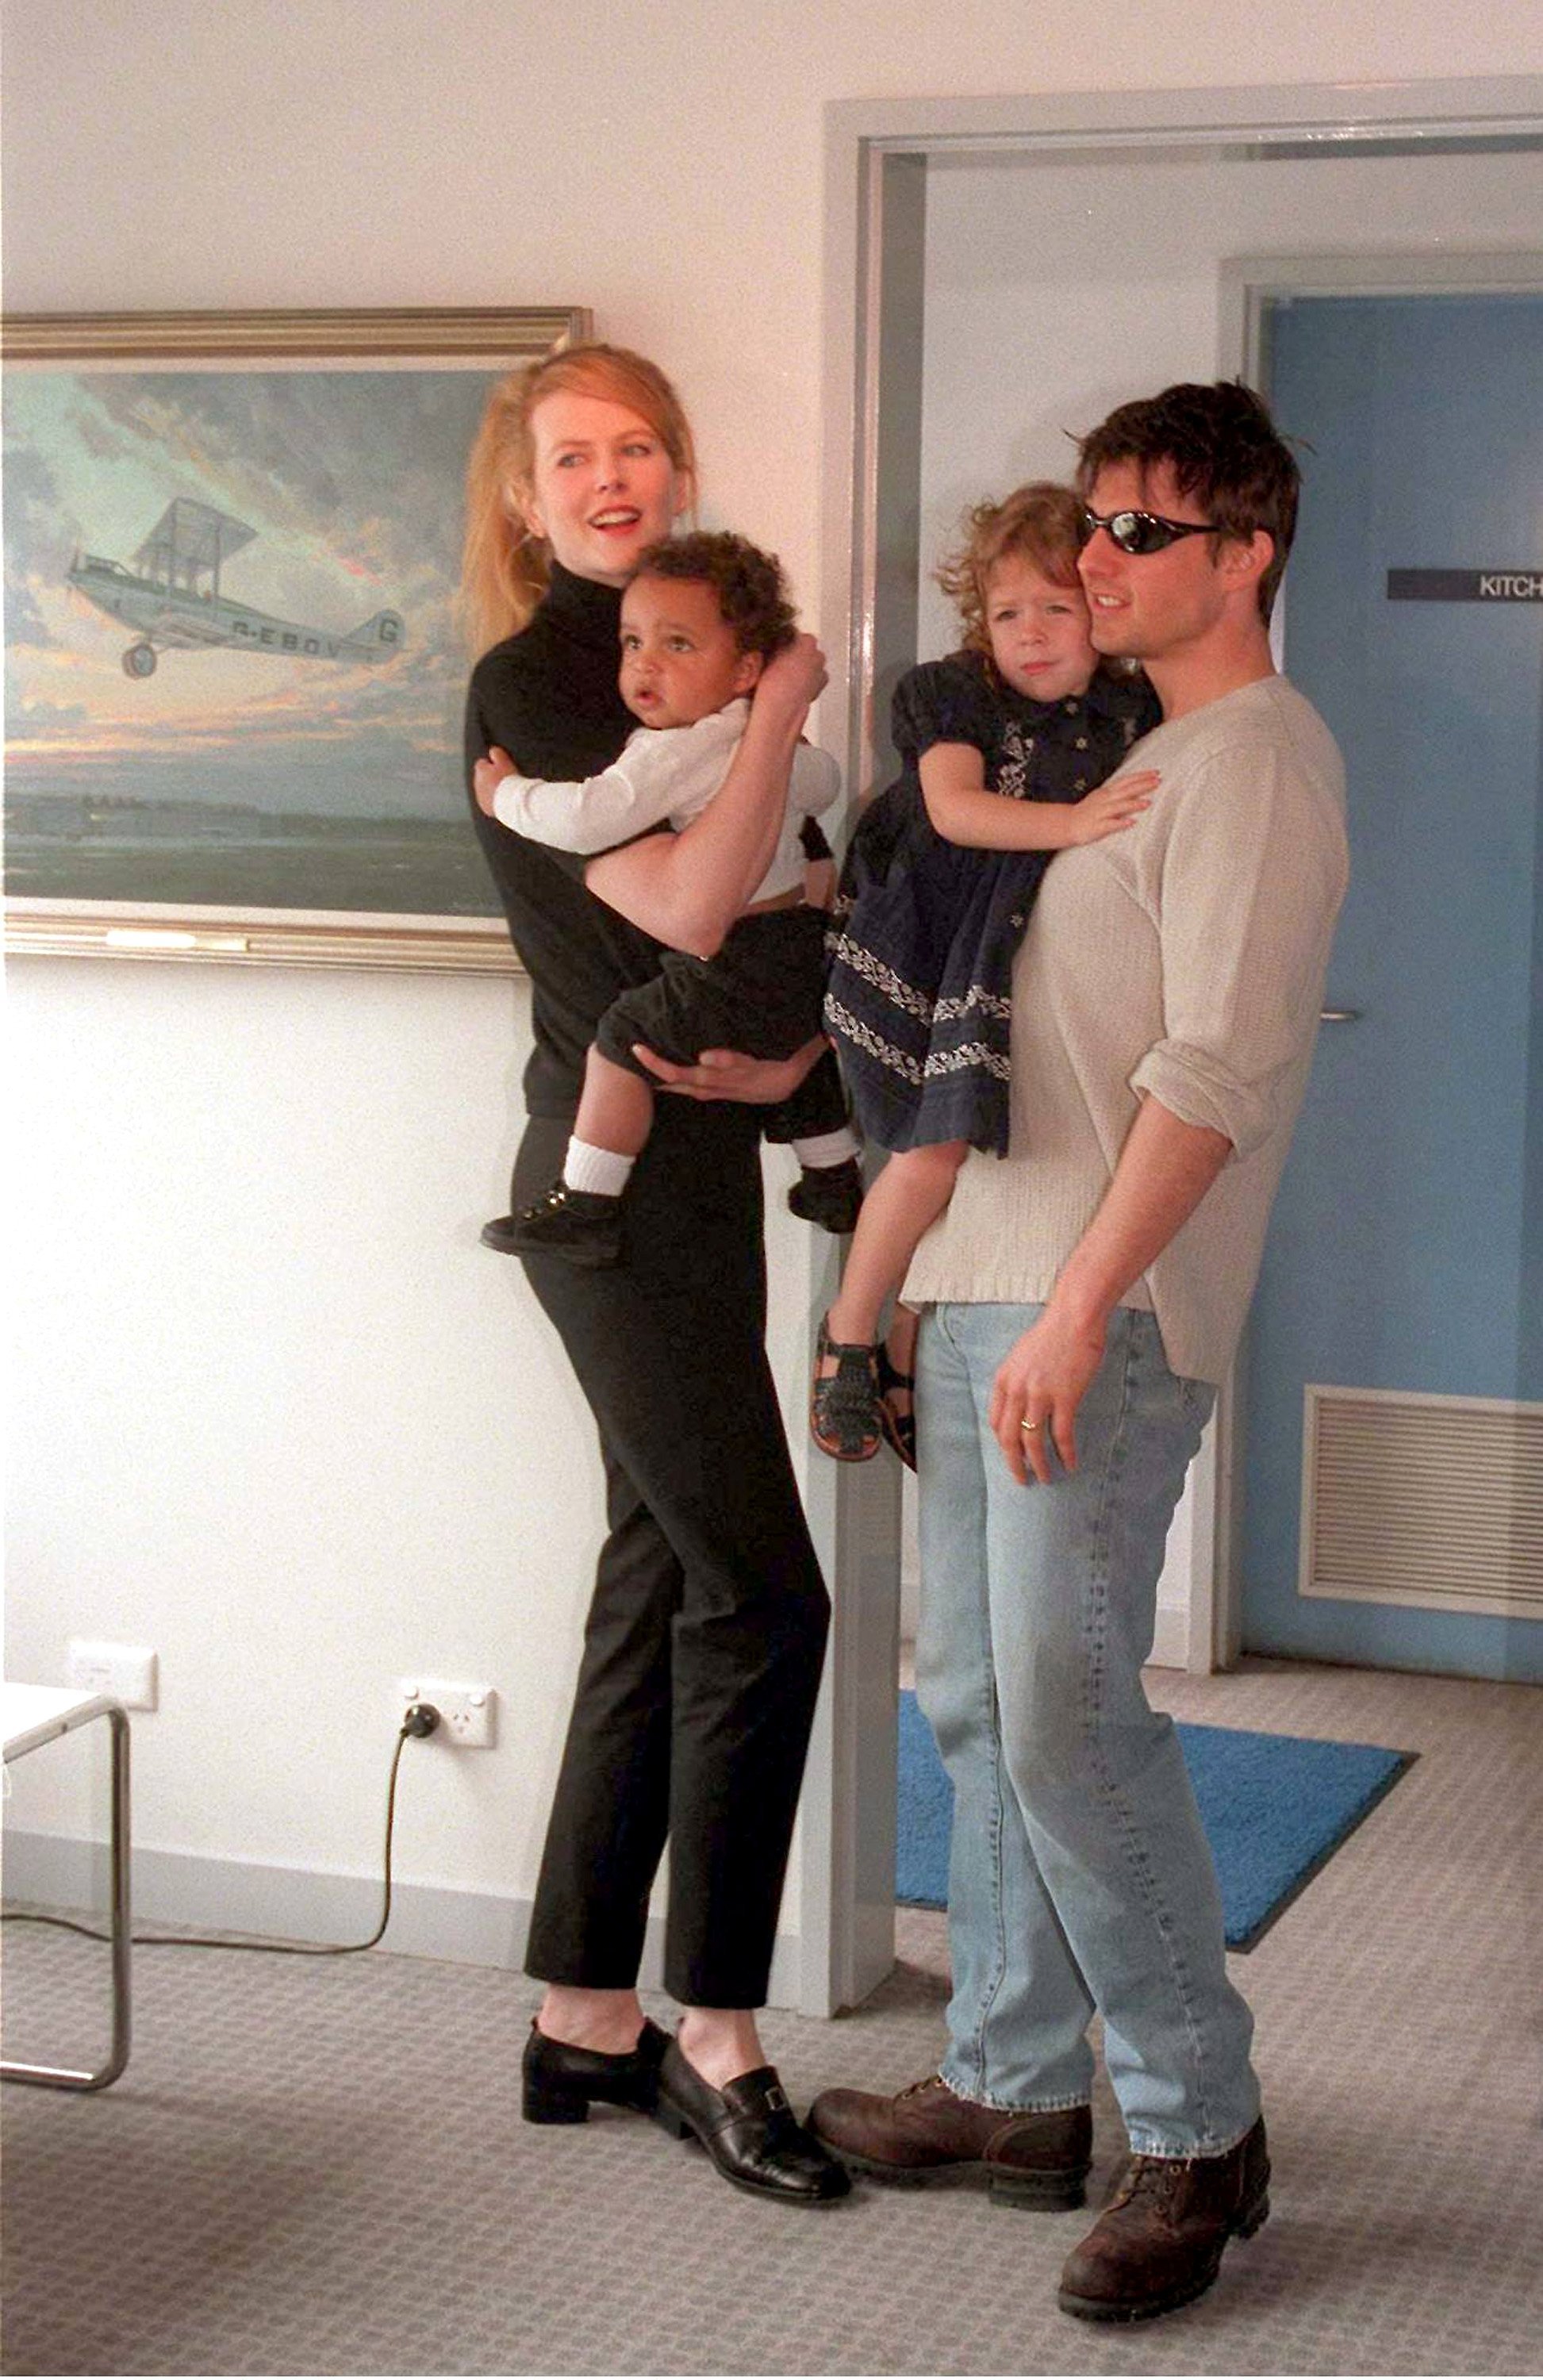 Nicole Kidman and husband Tom Cruise arrive at Sydney Kingsford Smith airport and introduce their children Connor and Isabella to the media January 24, 1996, in Sydney, Australia. | Source: Getty Images.